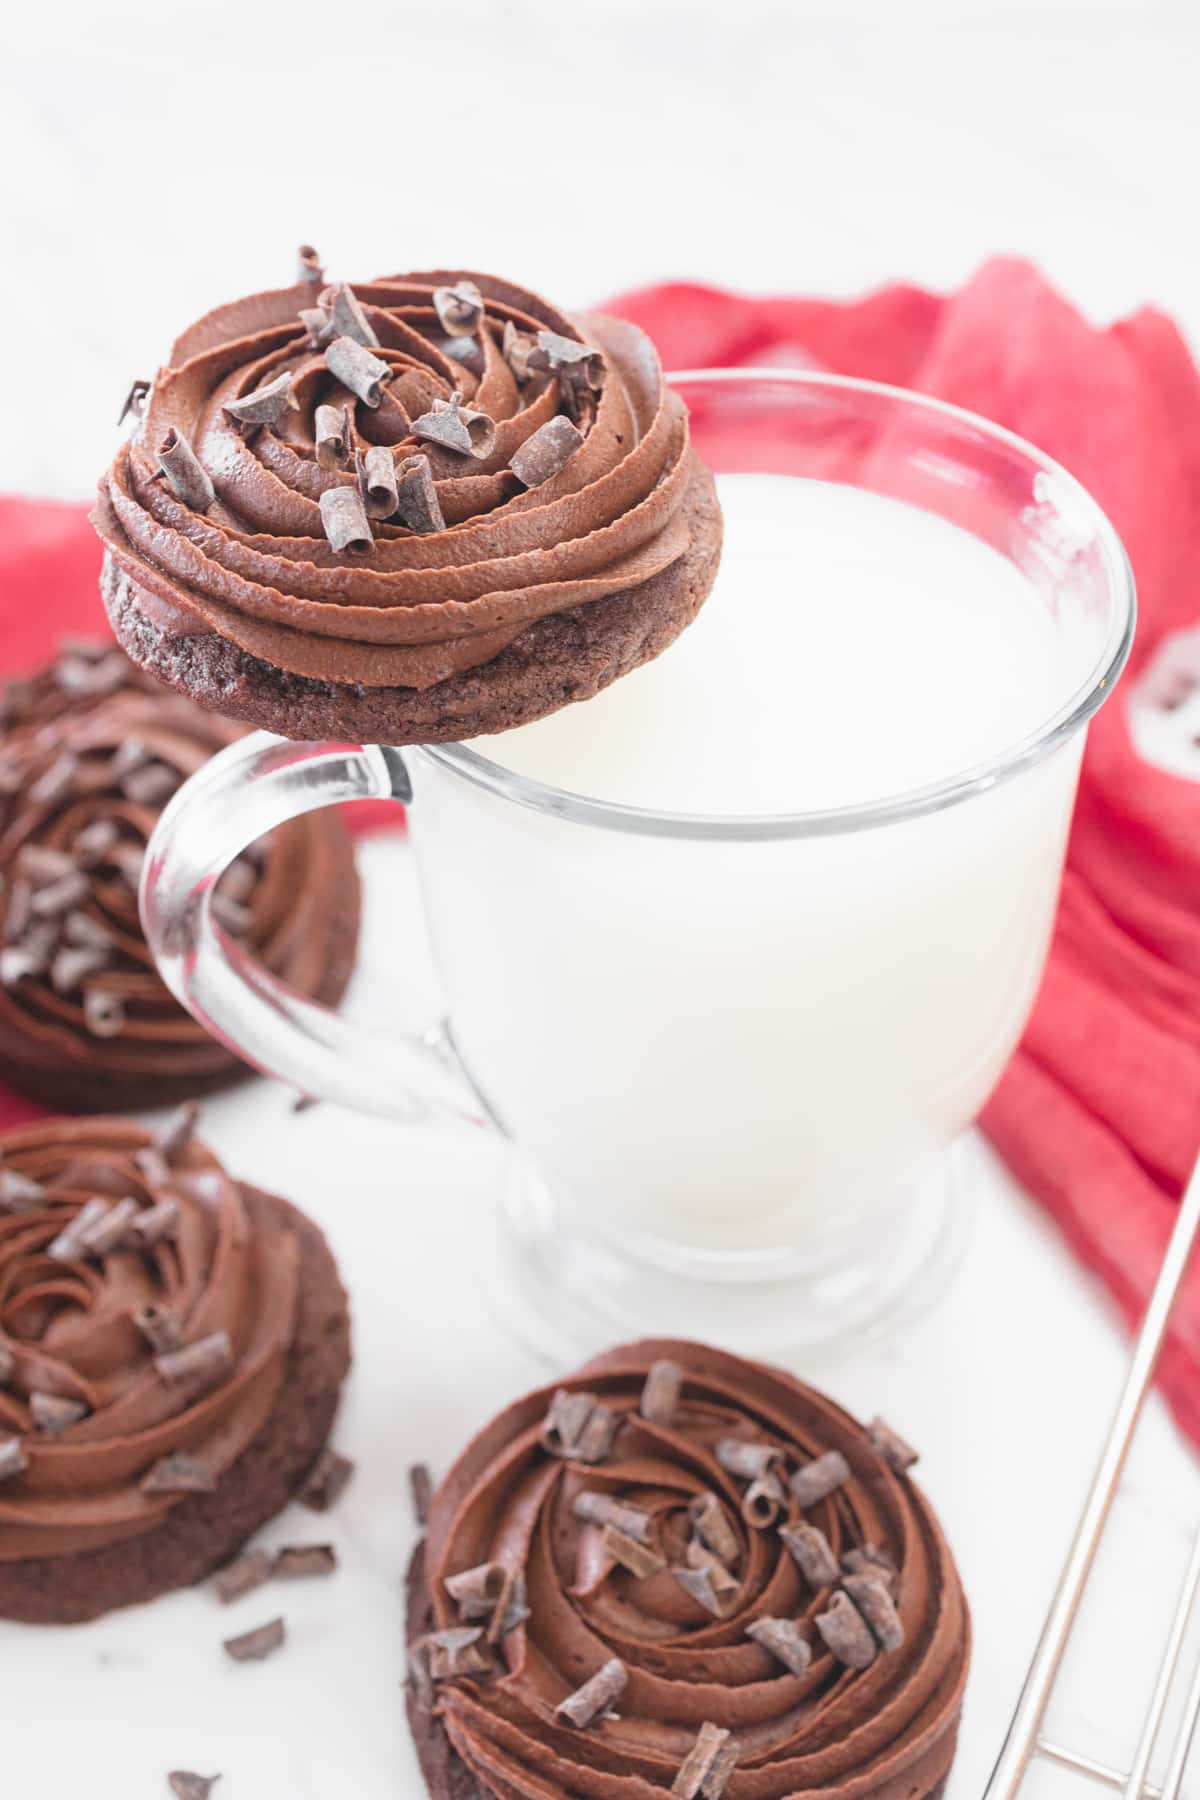 A glass of milk with a chocolate cake cookie resting on its brim.